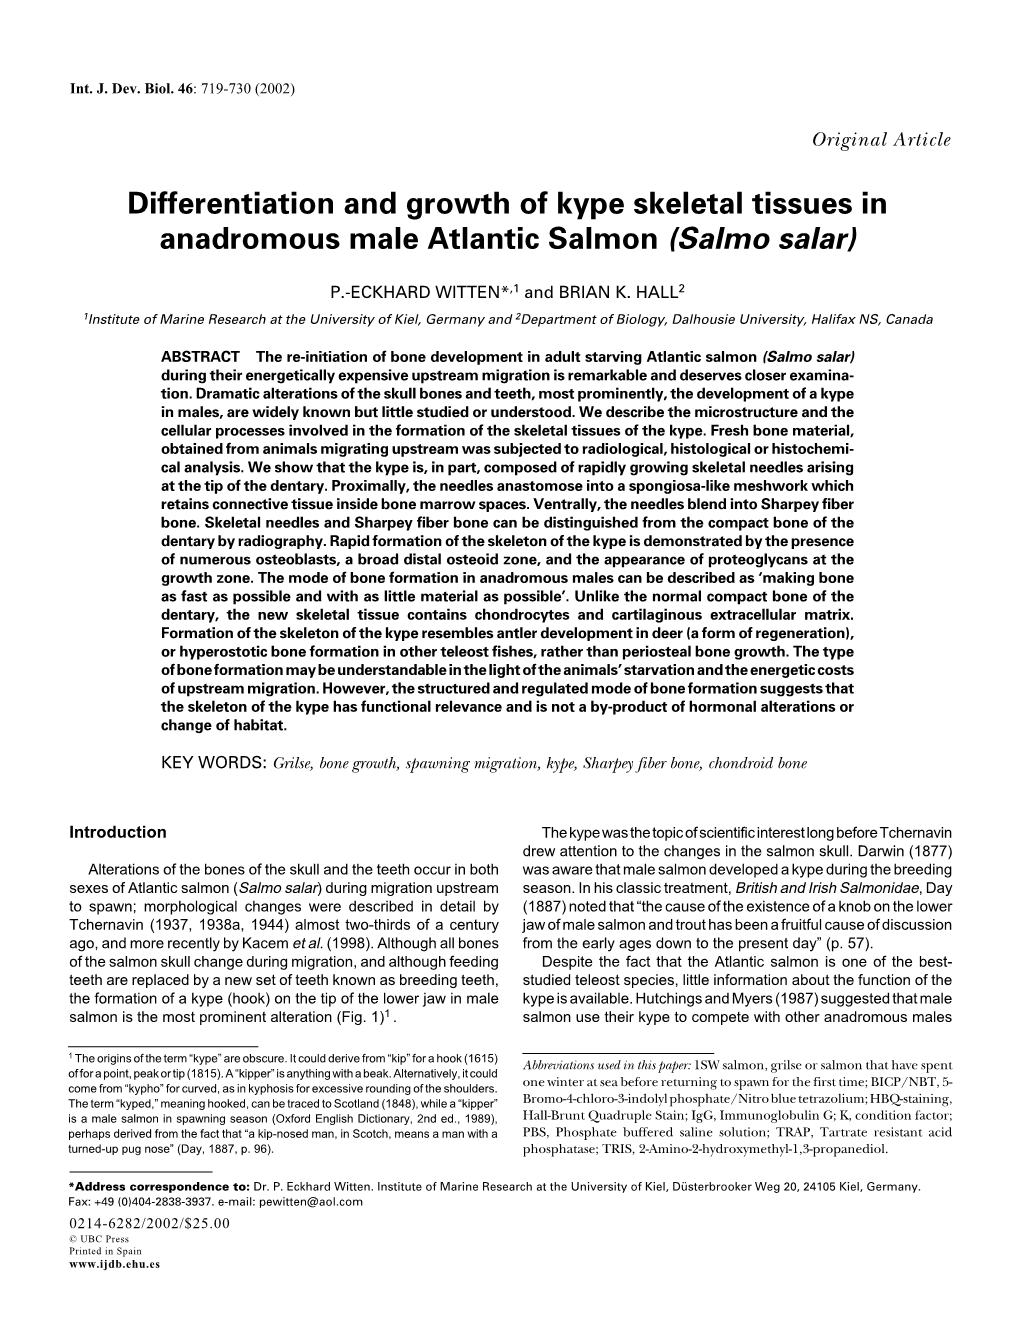 Differentiation and Growth of Kype Skeletal Tissues in Anadromous Male Atlantic Salmon (Salmo Salar)